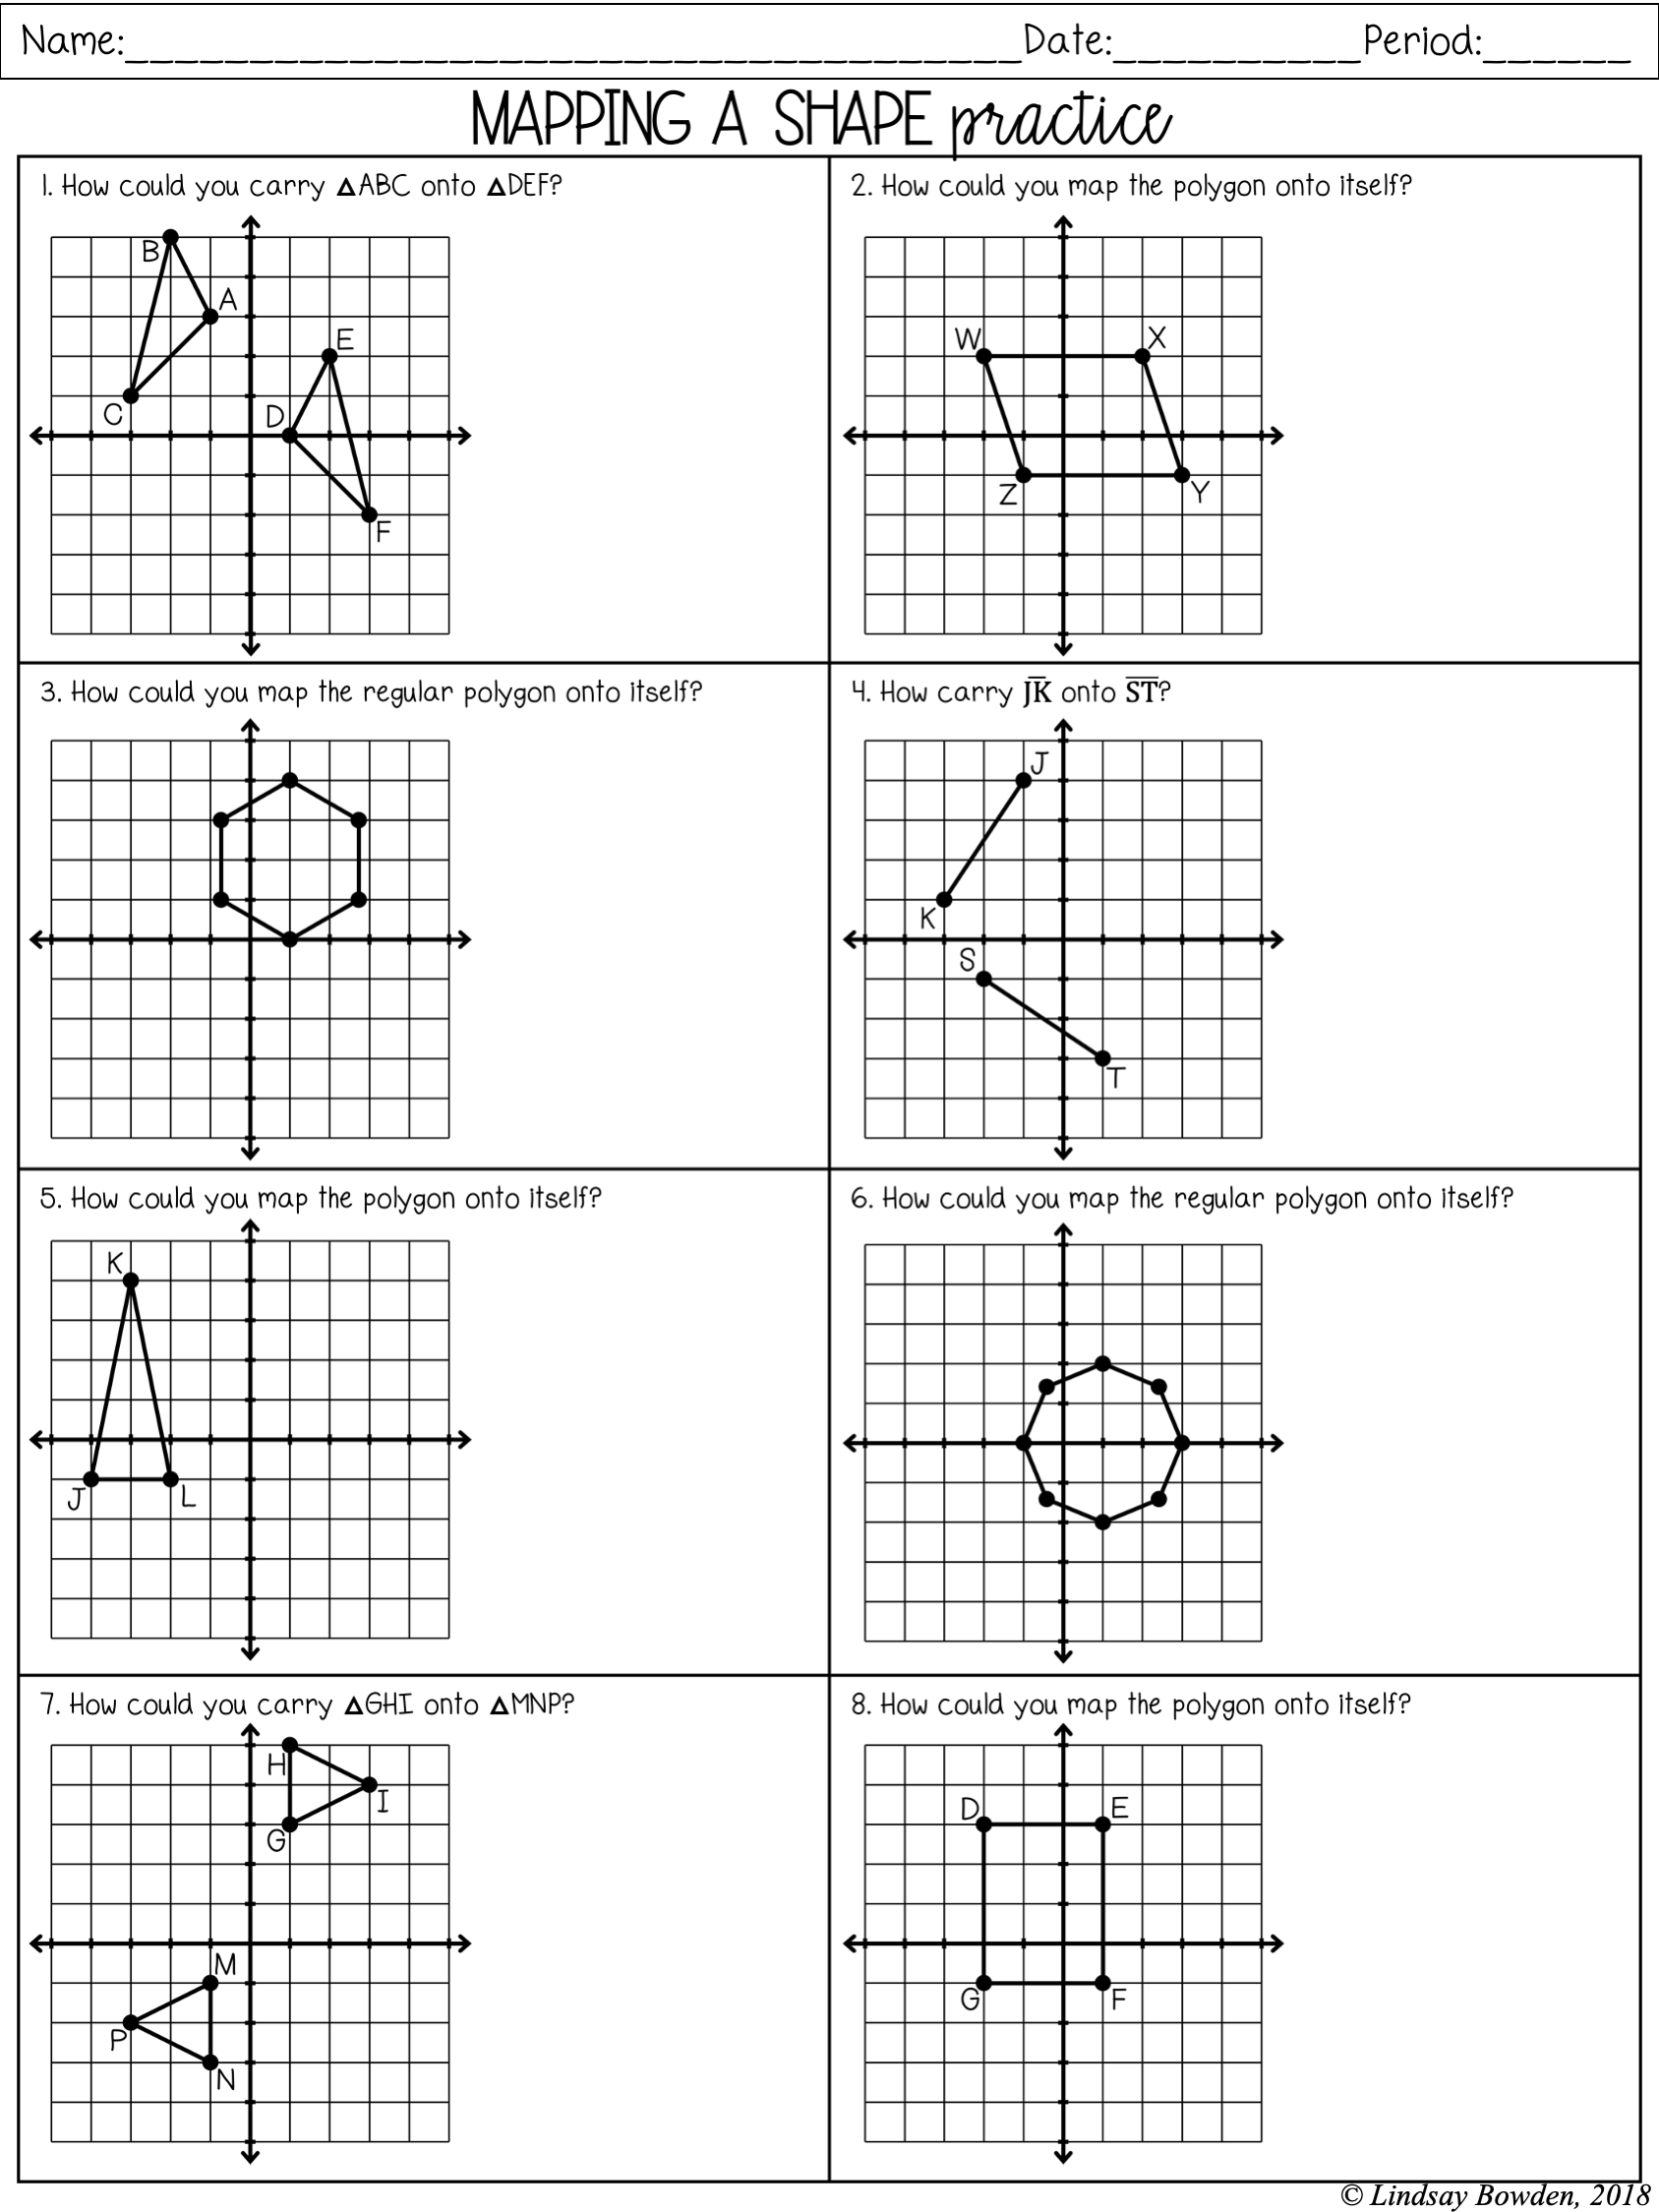 transformations of shapes in geometry